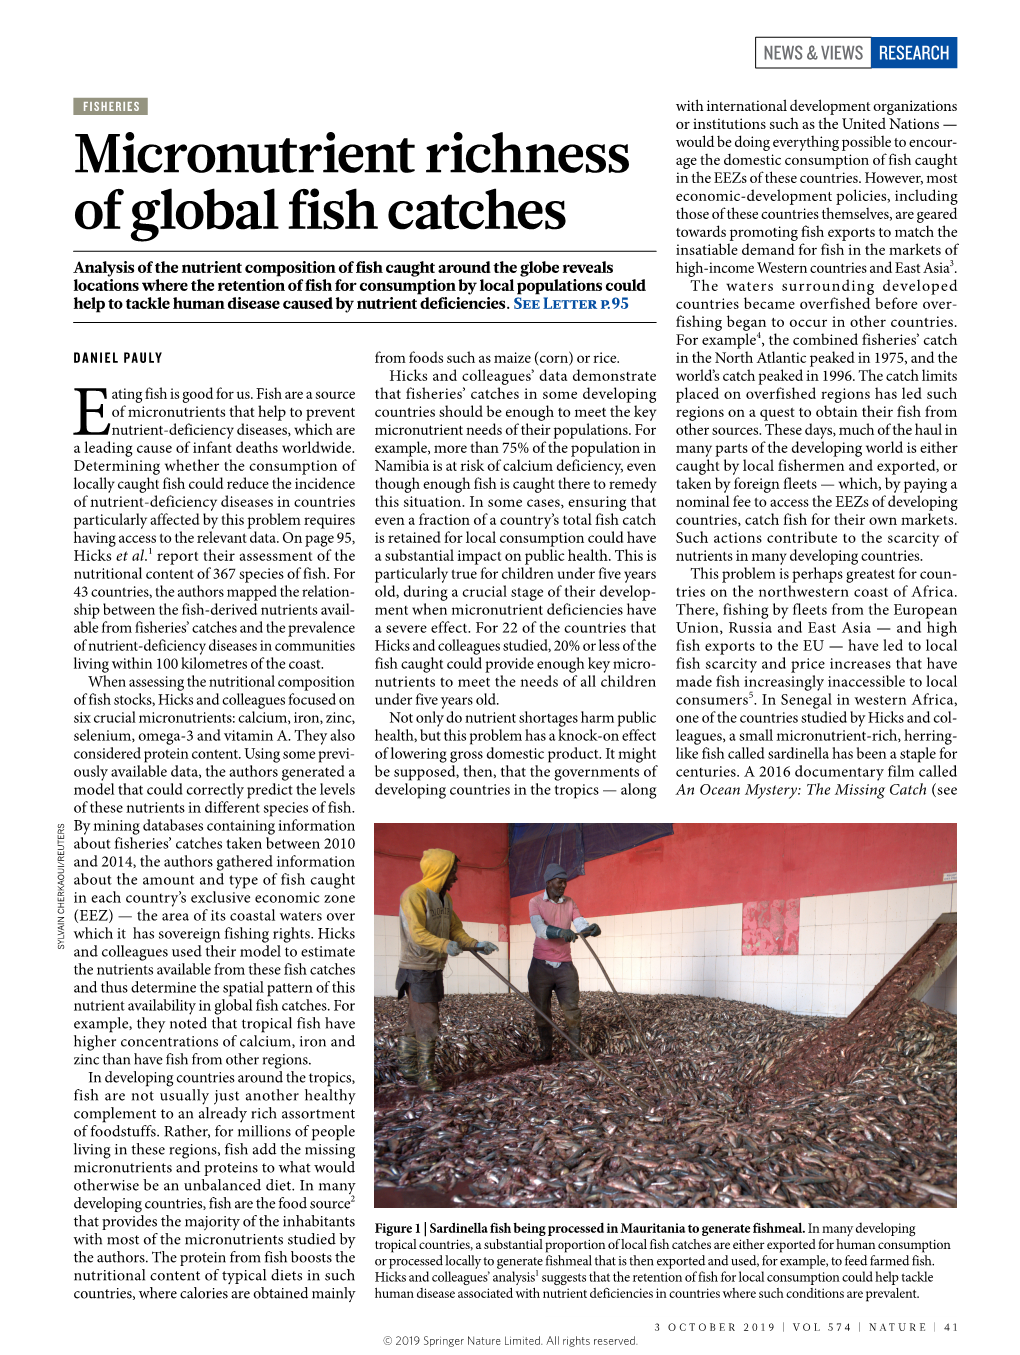 Micronutrient Richness of Global Fish Catches